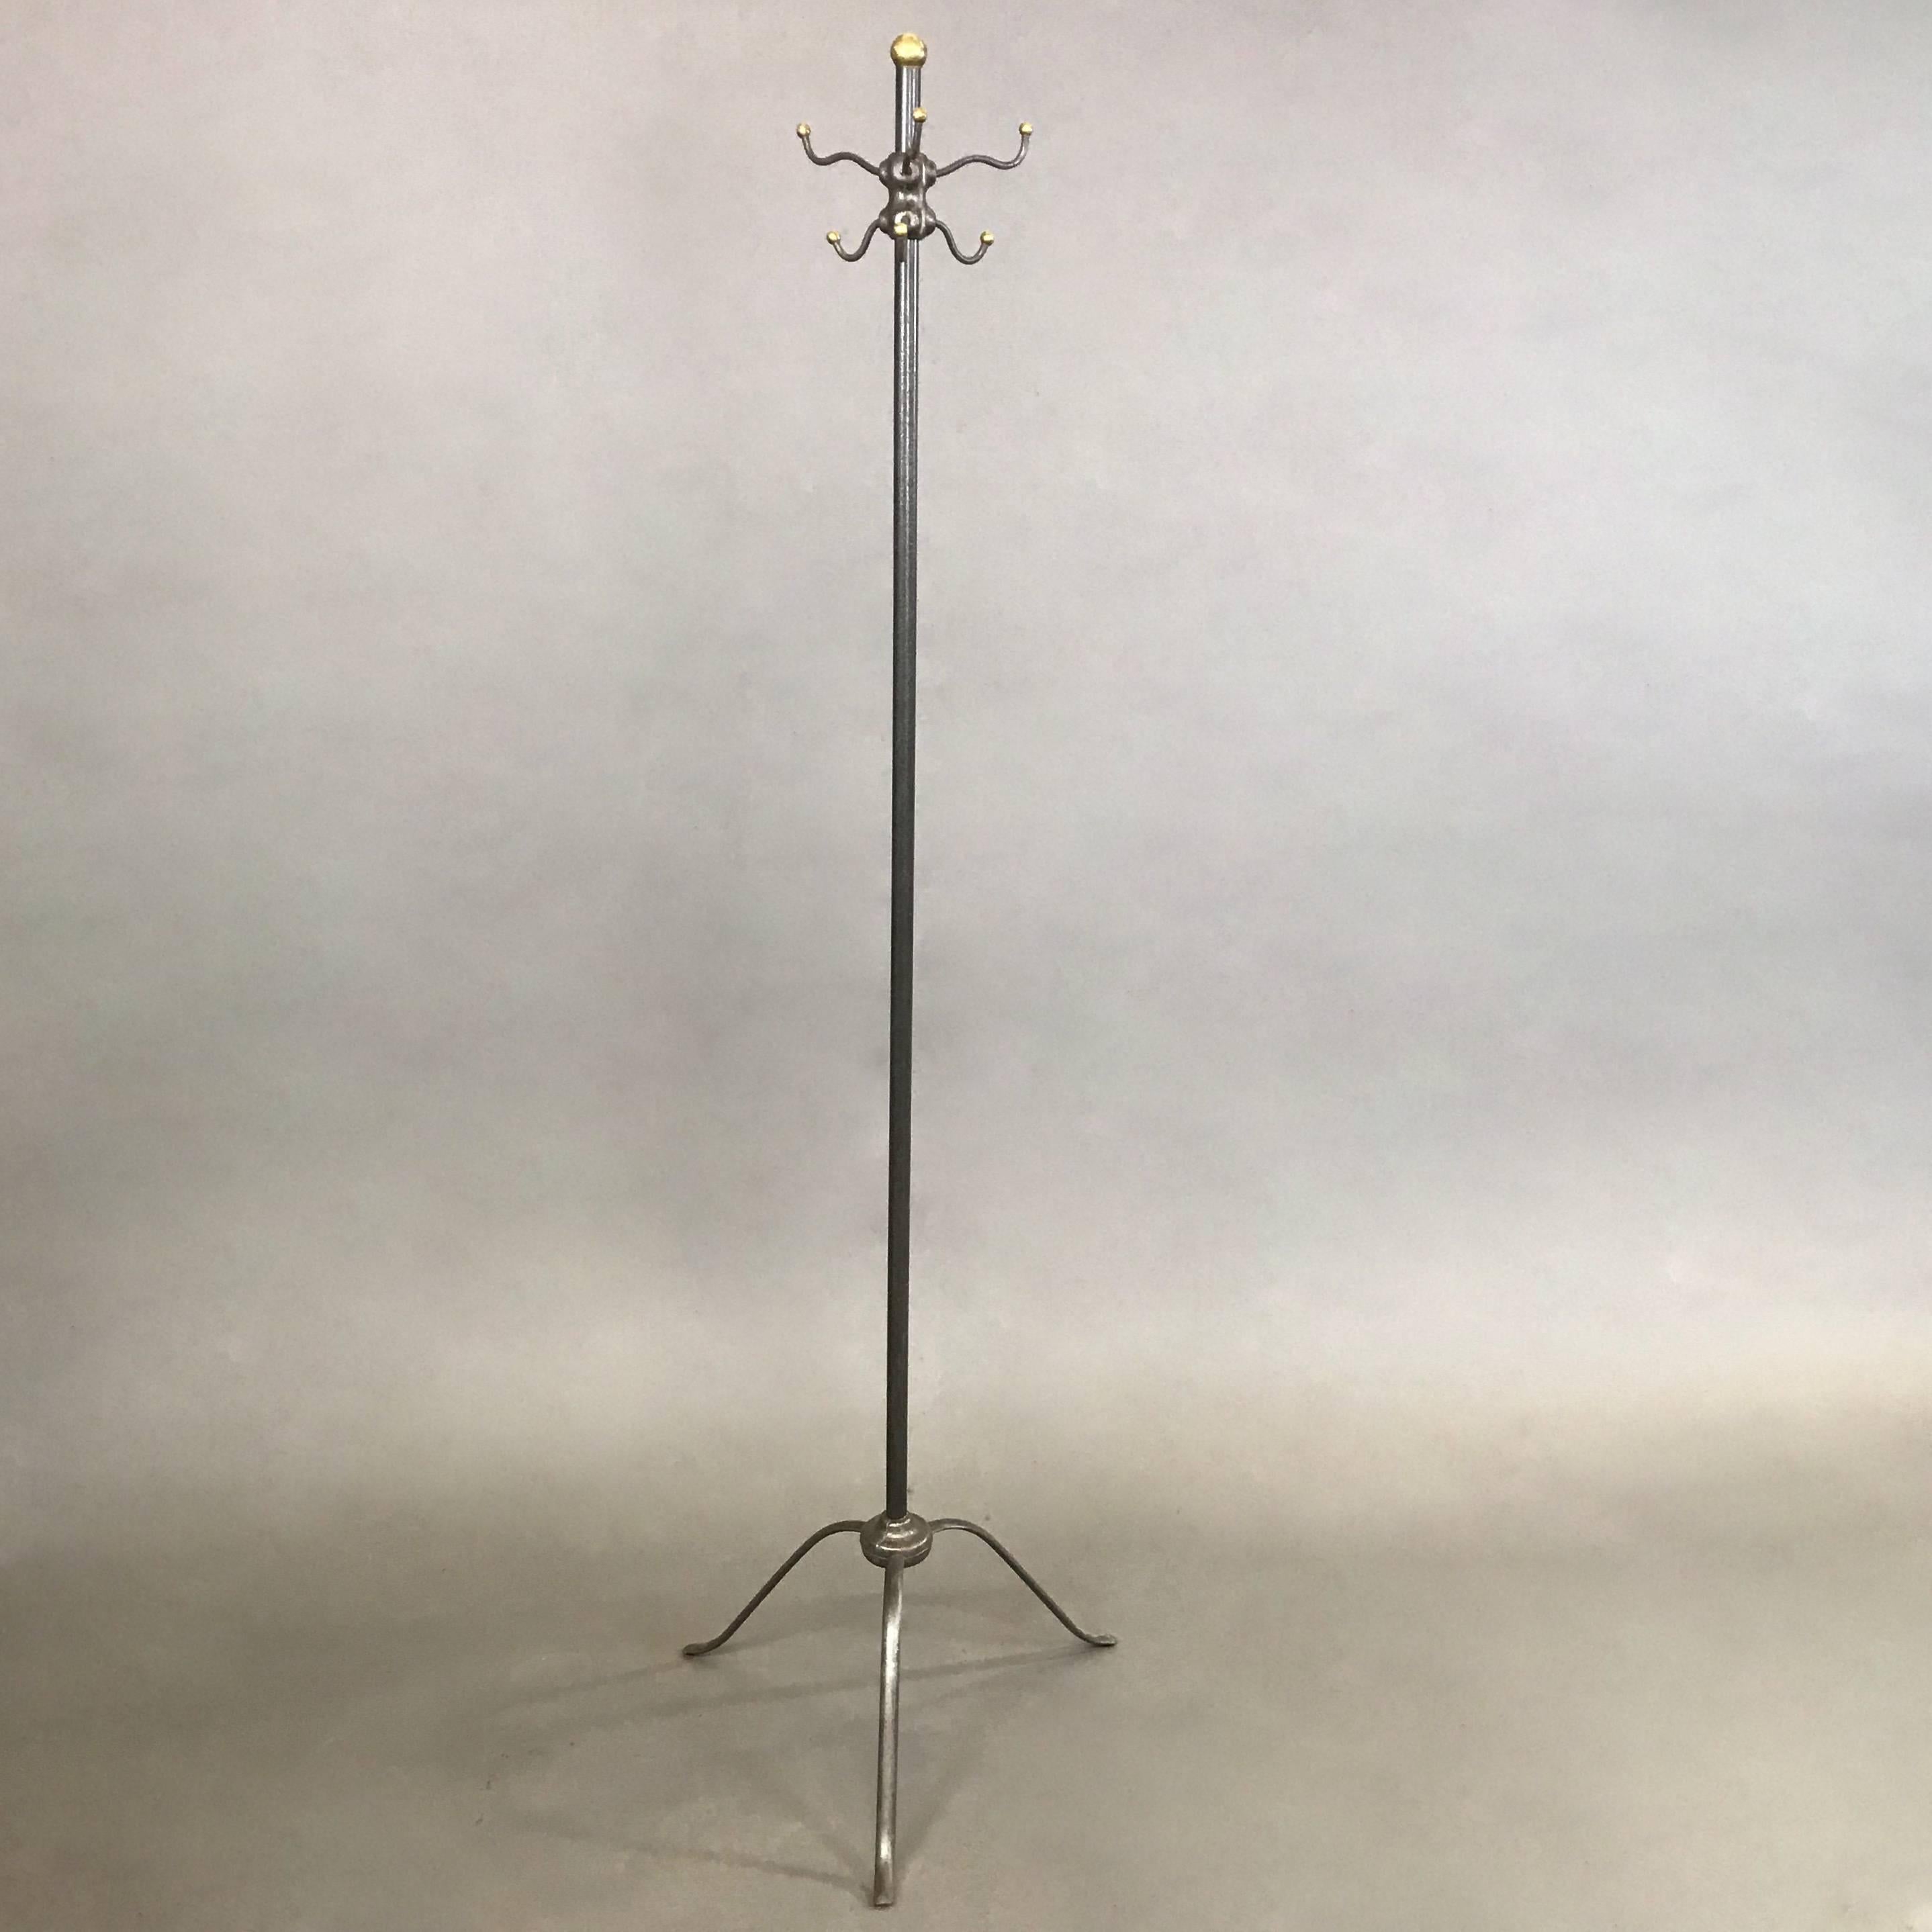 Elegant, antique, late 19th century, industrial, brushed steel coat rack features brass ball details with a slender three prong base.